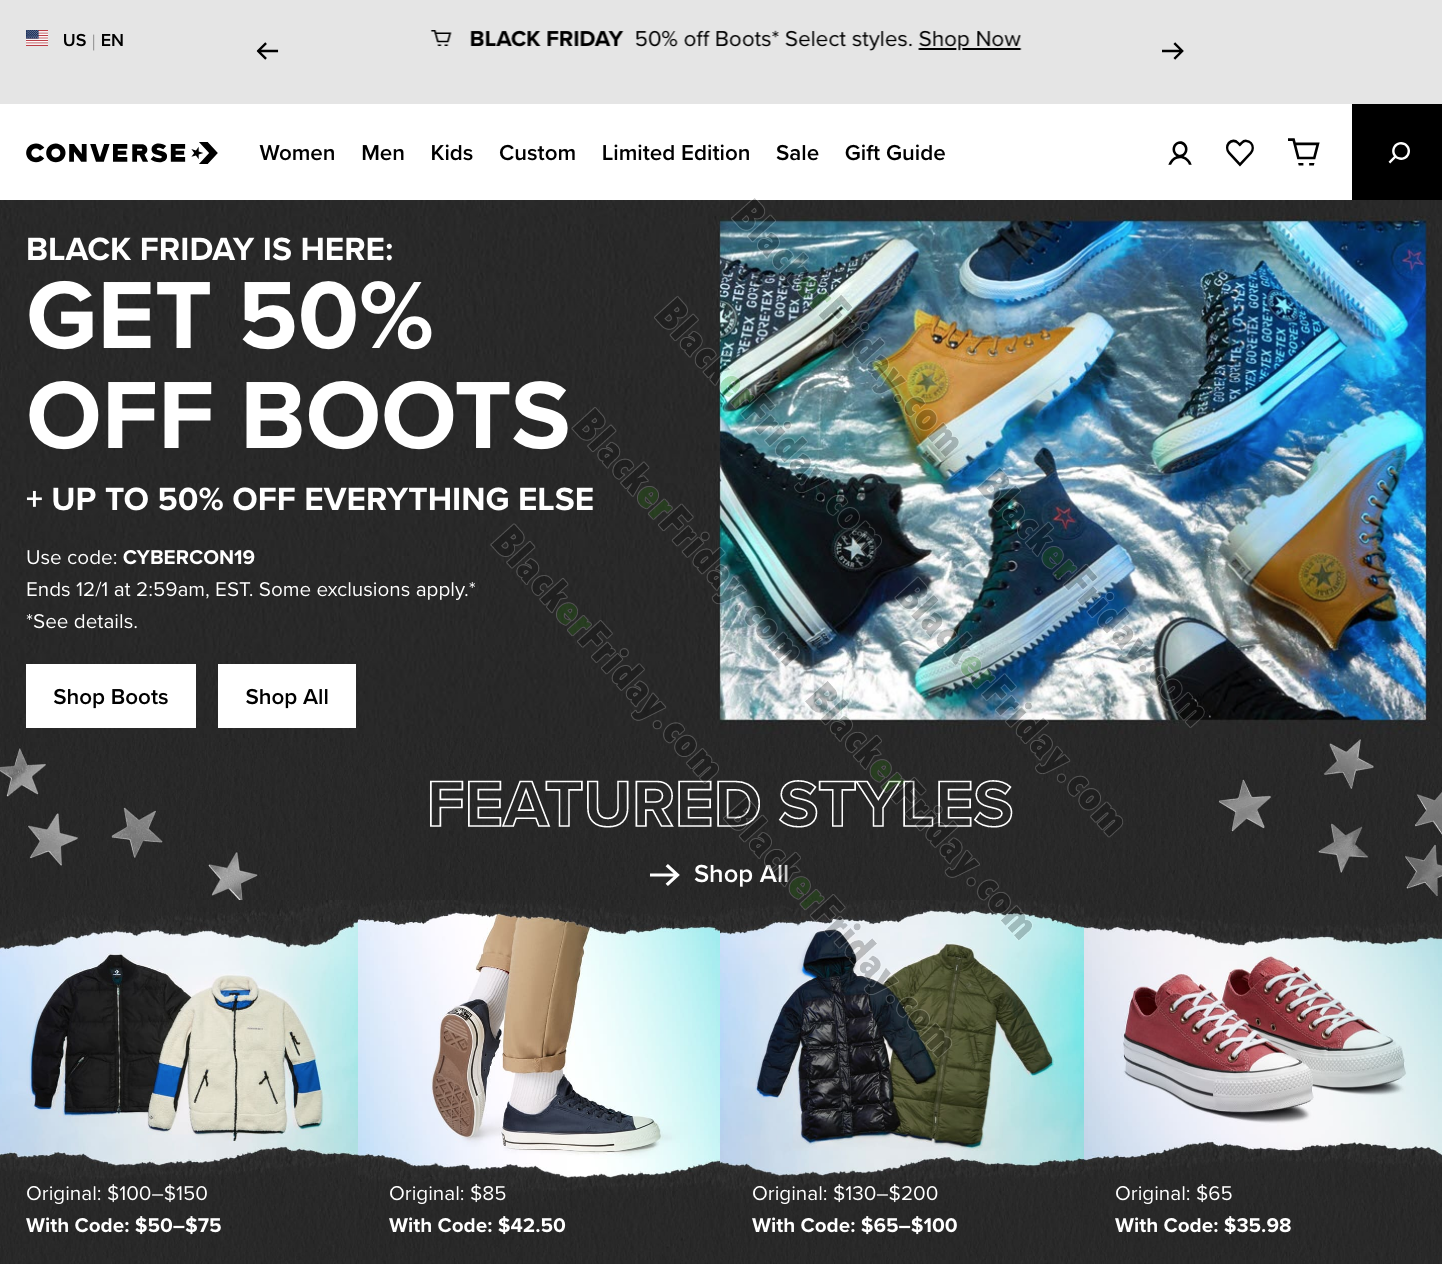 Converse Black Friday 2021 Sale - What 